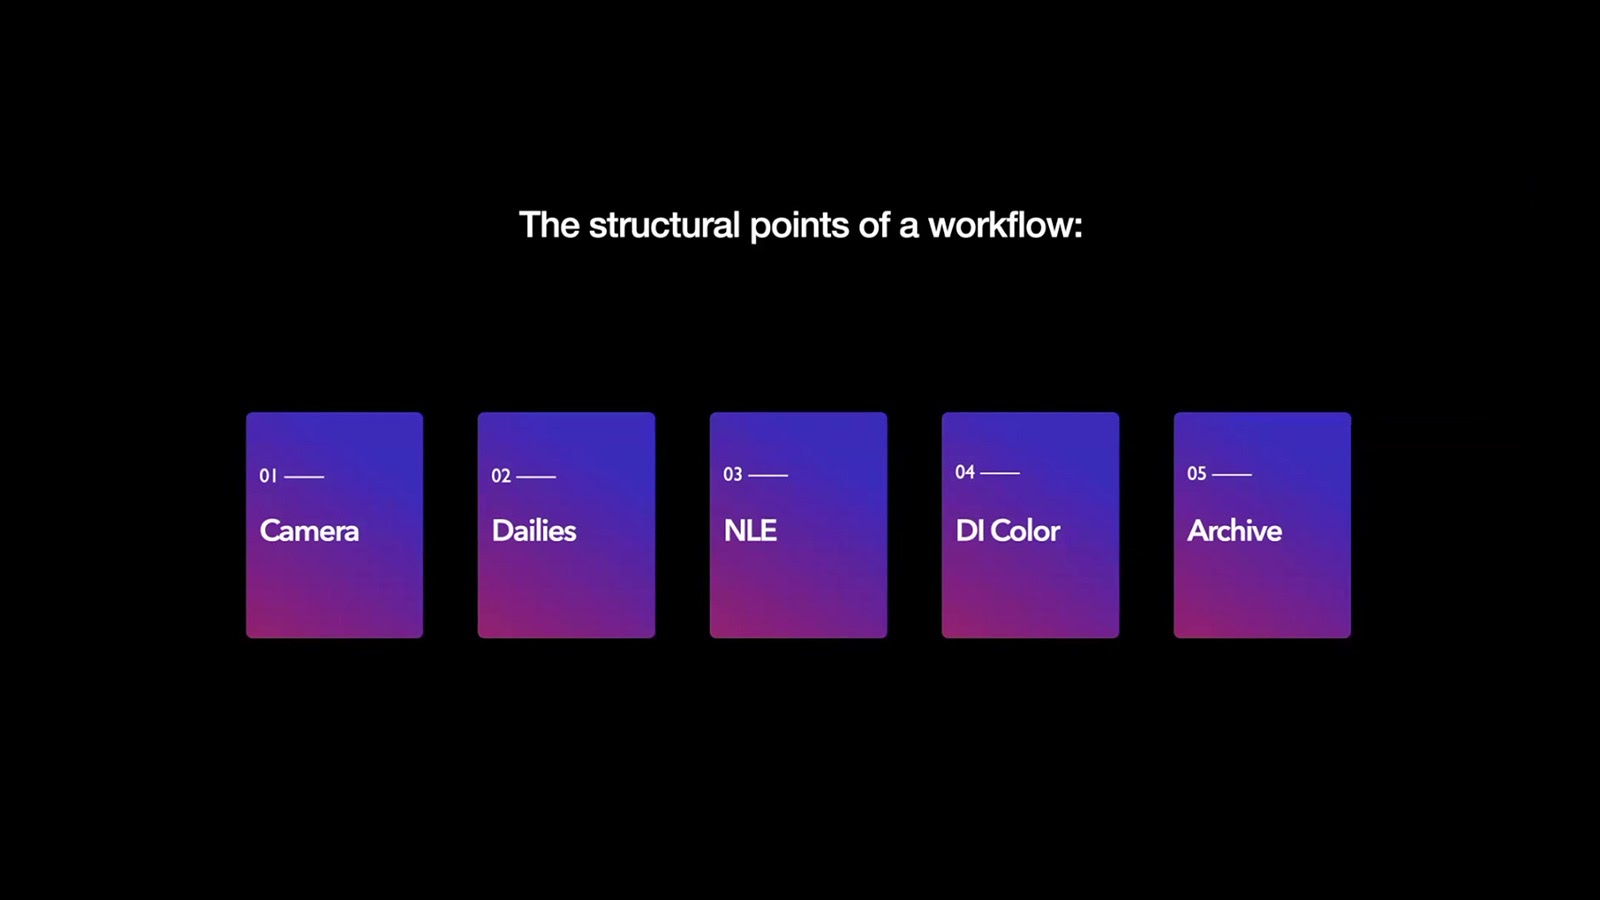 The structure of a typical workflow